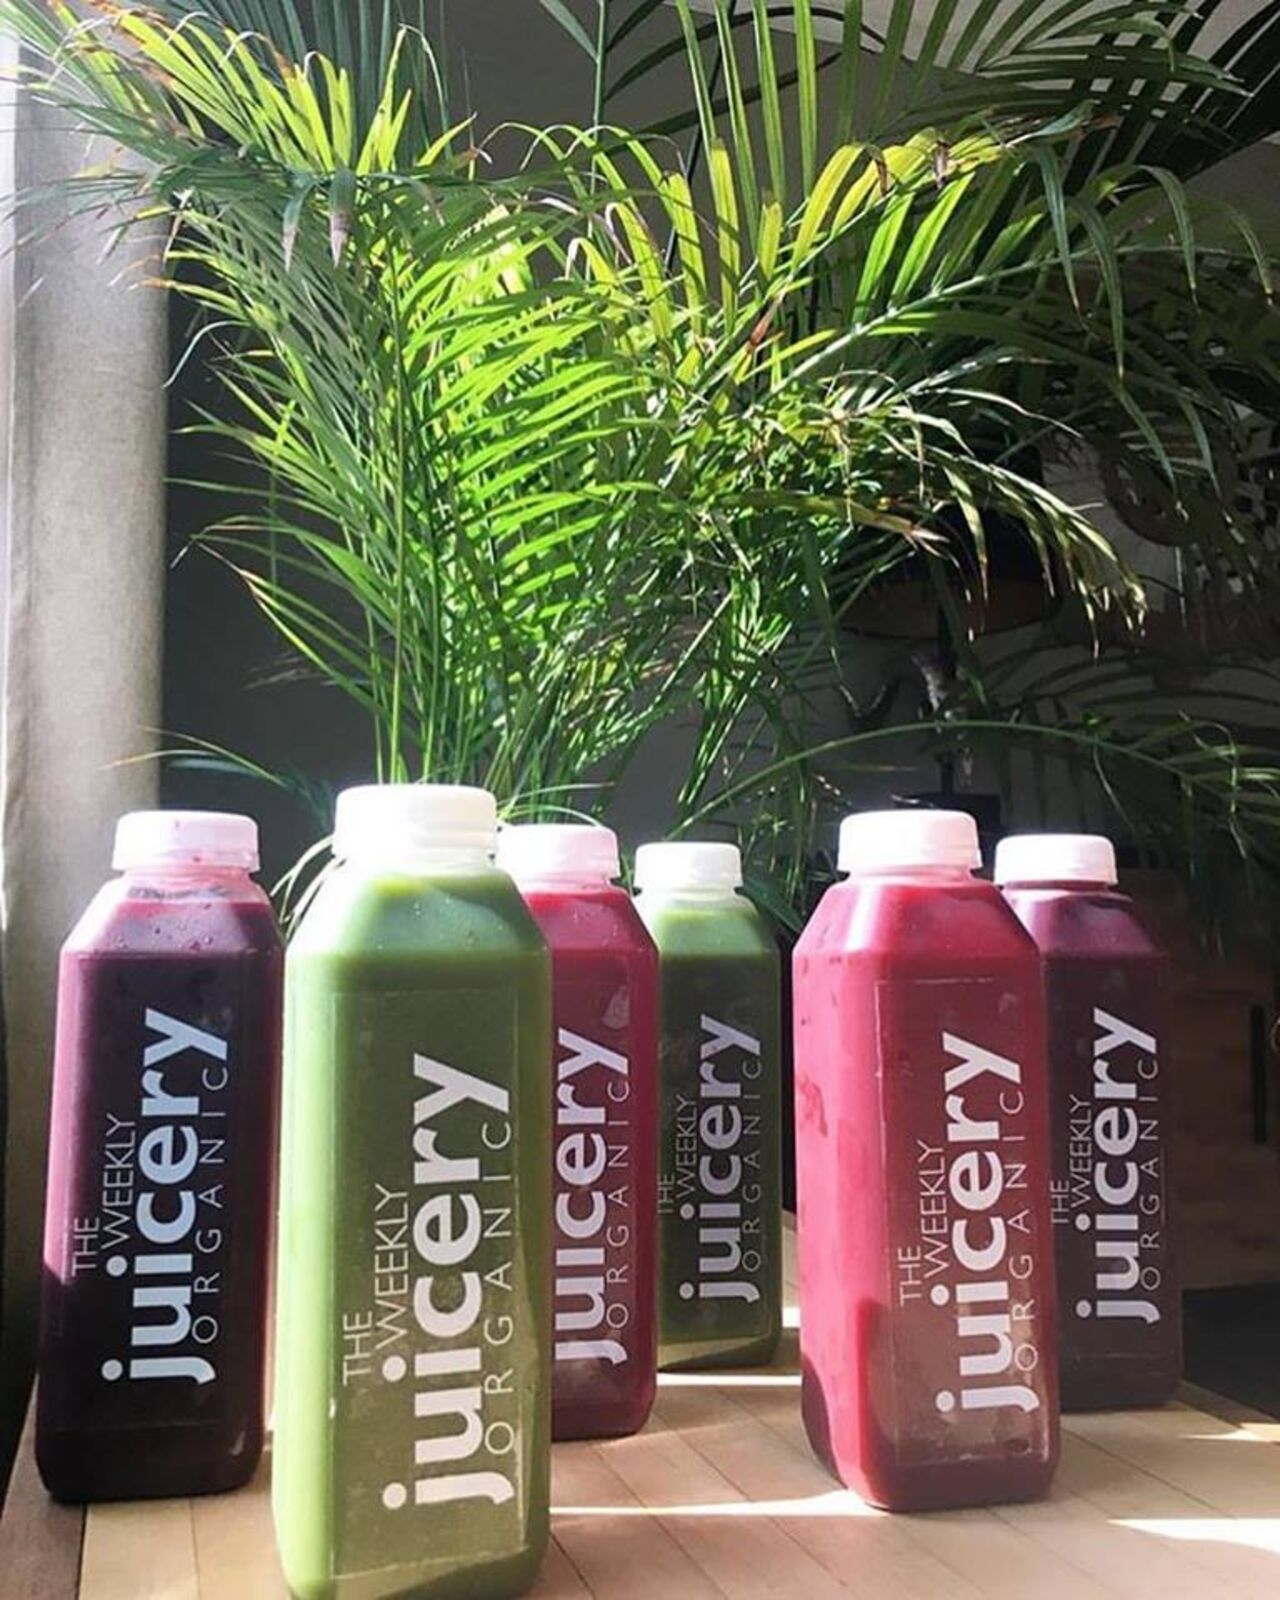 A photo of The Weekly Juicery, Palomar